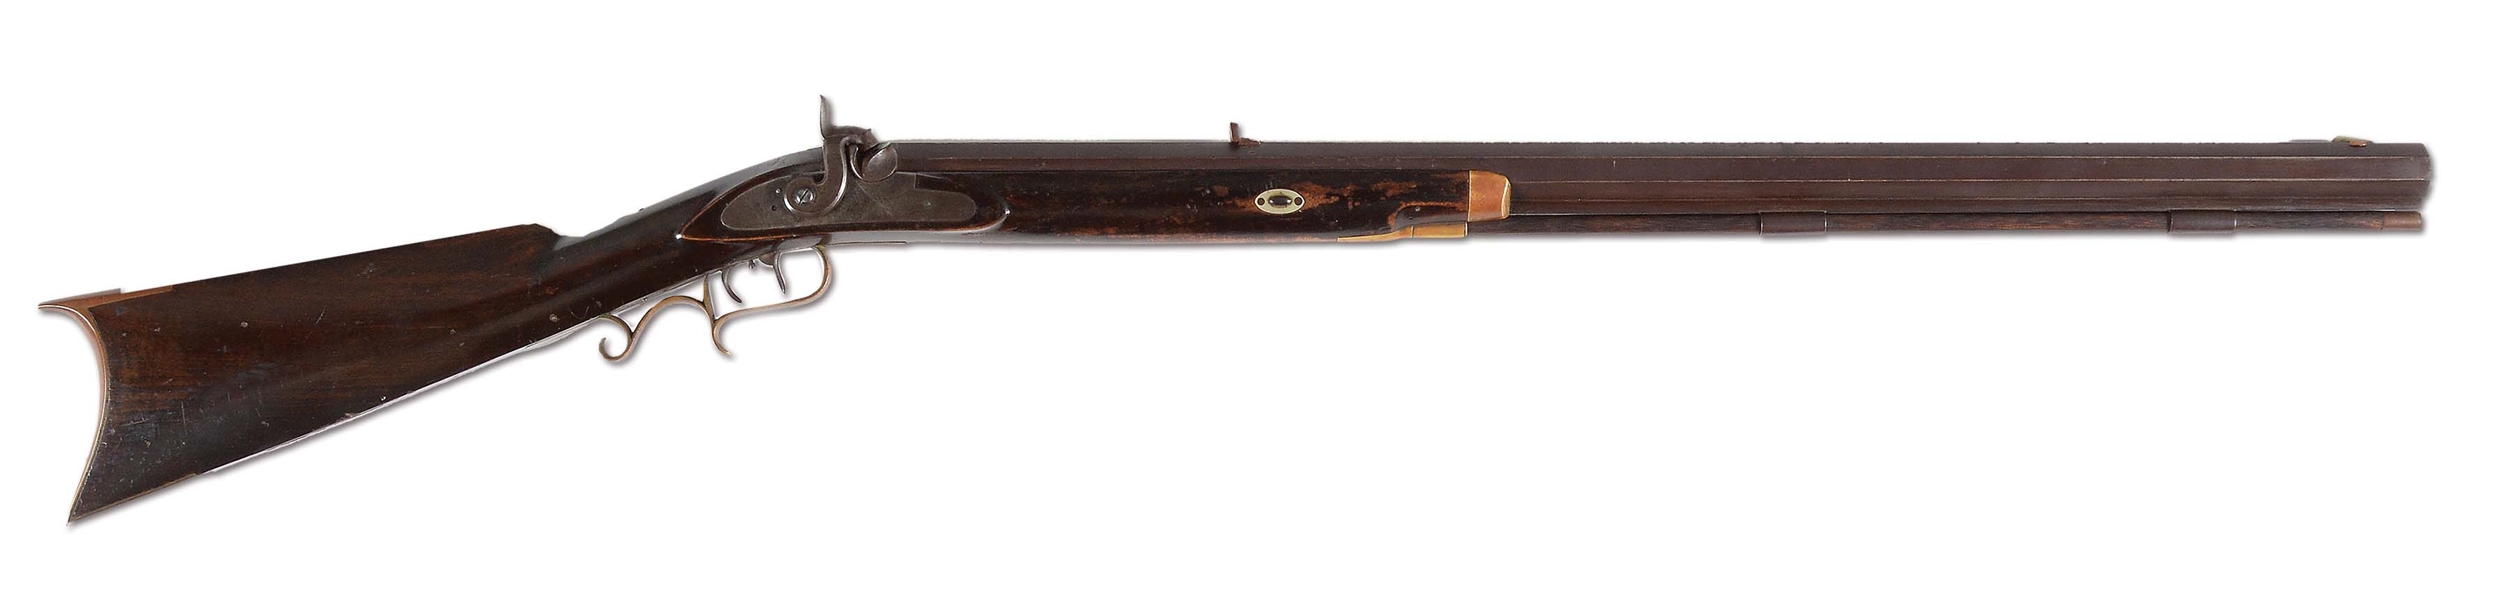 (A) EXTREMELY SCARCE & HIGH CONDITION SAMUEL HAWKEN PERCUSSION RIFLE.